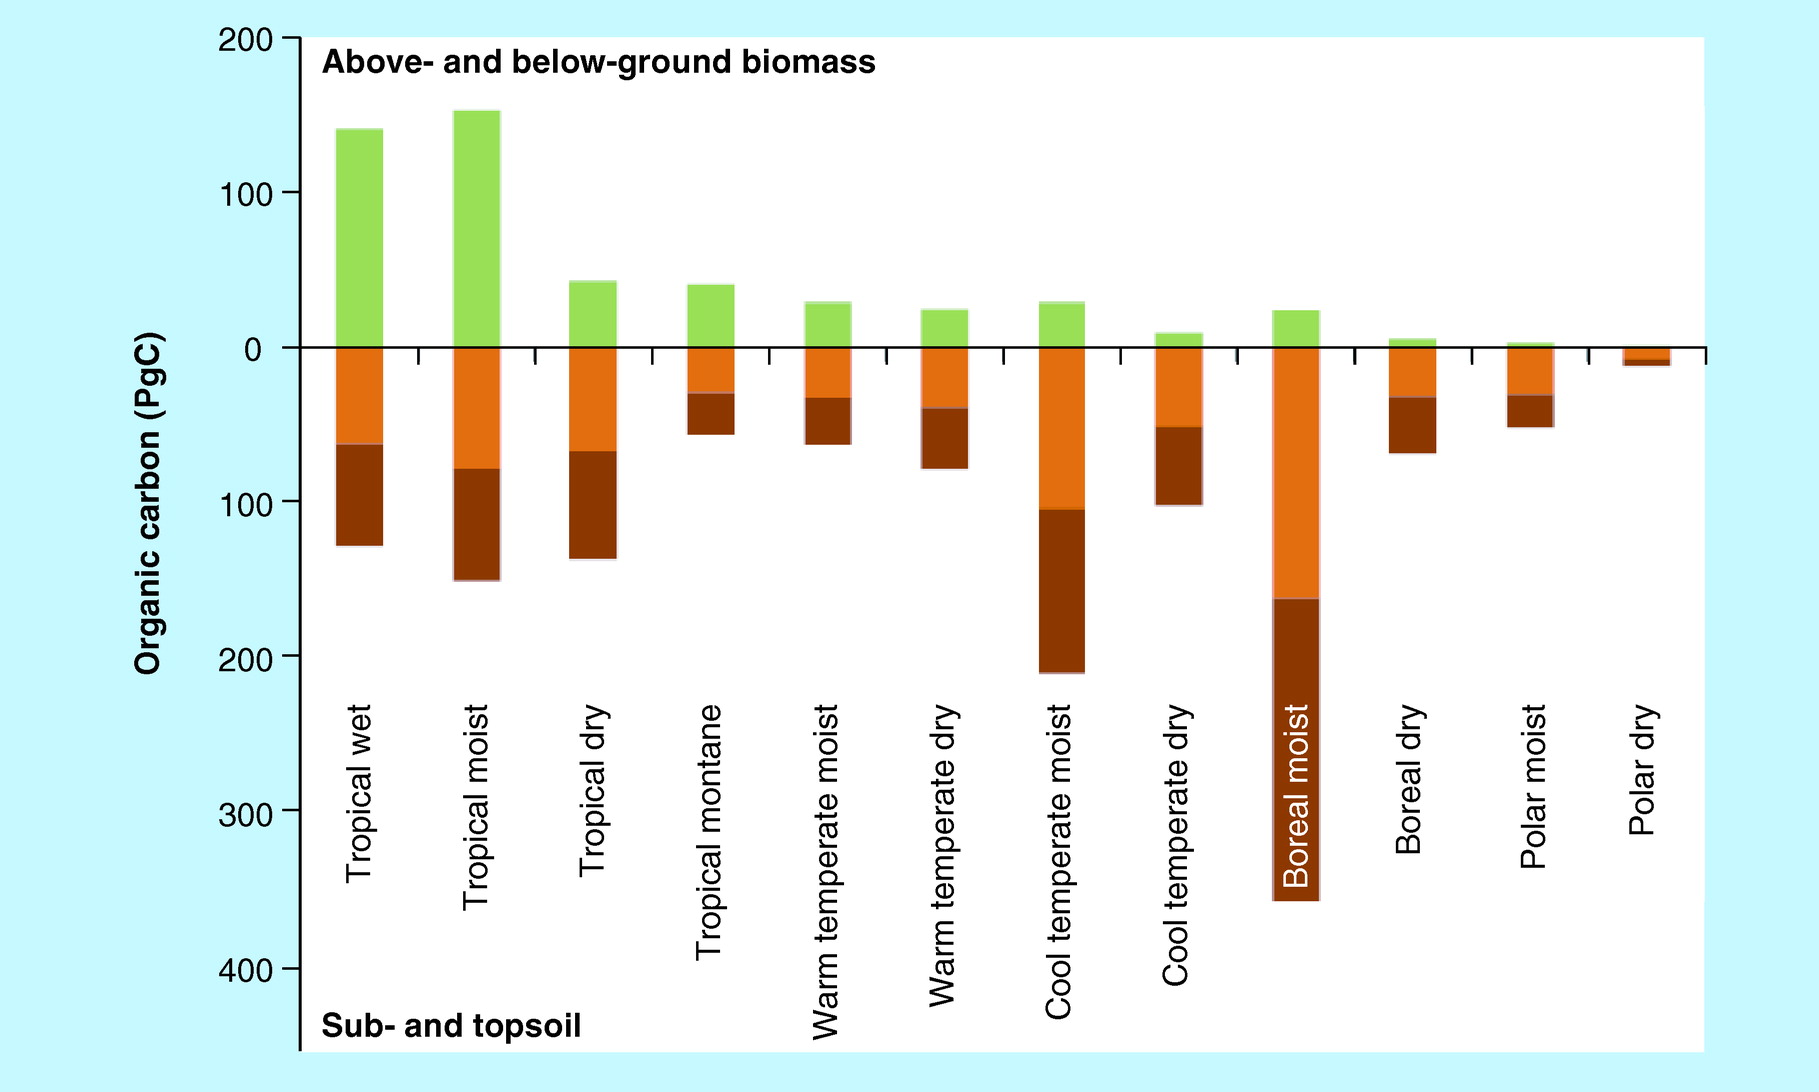 Figure 6: The amount of carbon above (green) and below ground biomass (topsoil = orange, subsoil = brown) for each biome. (Jackson et al., 2017)